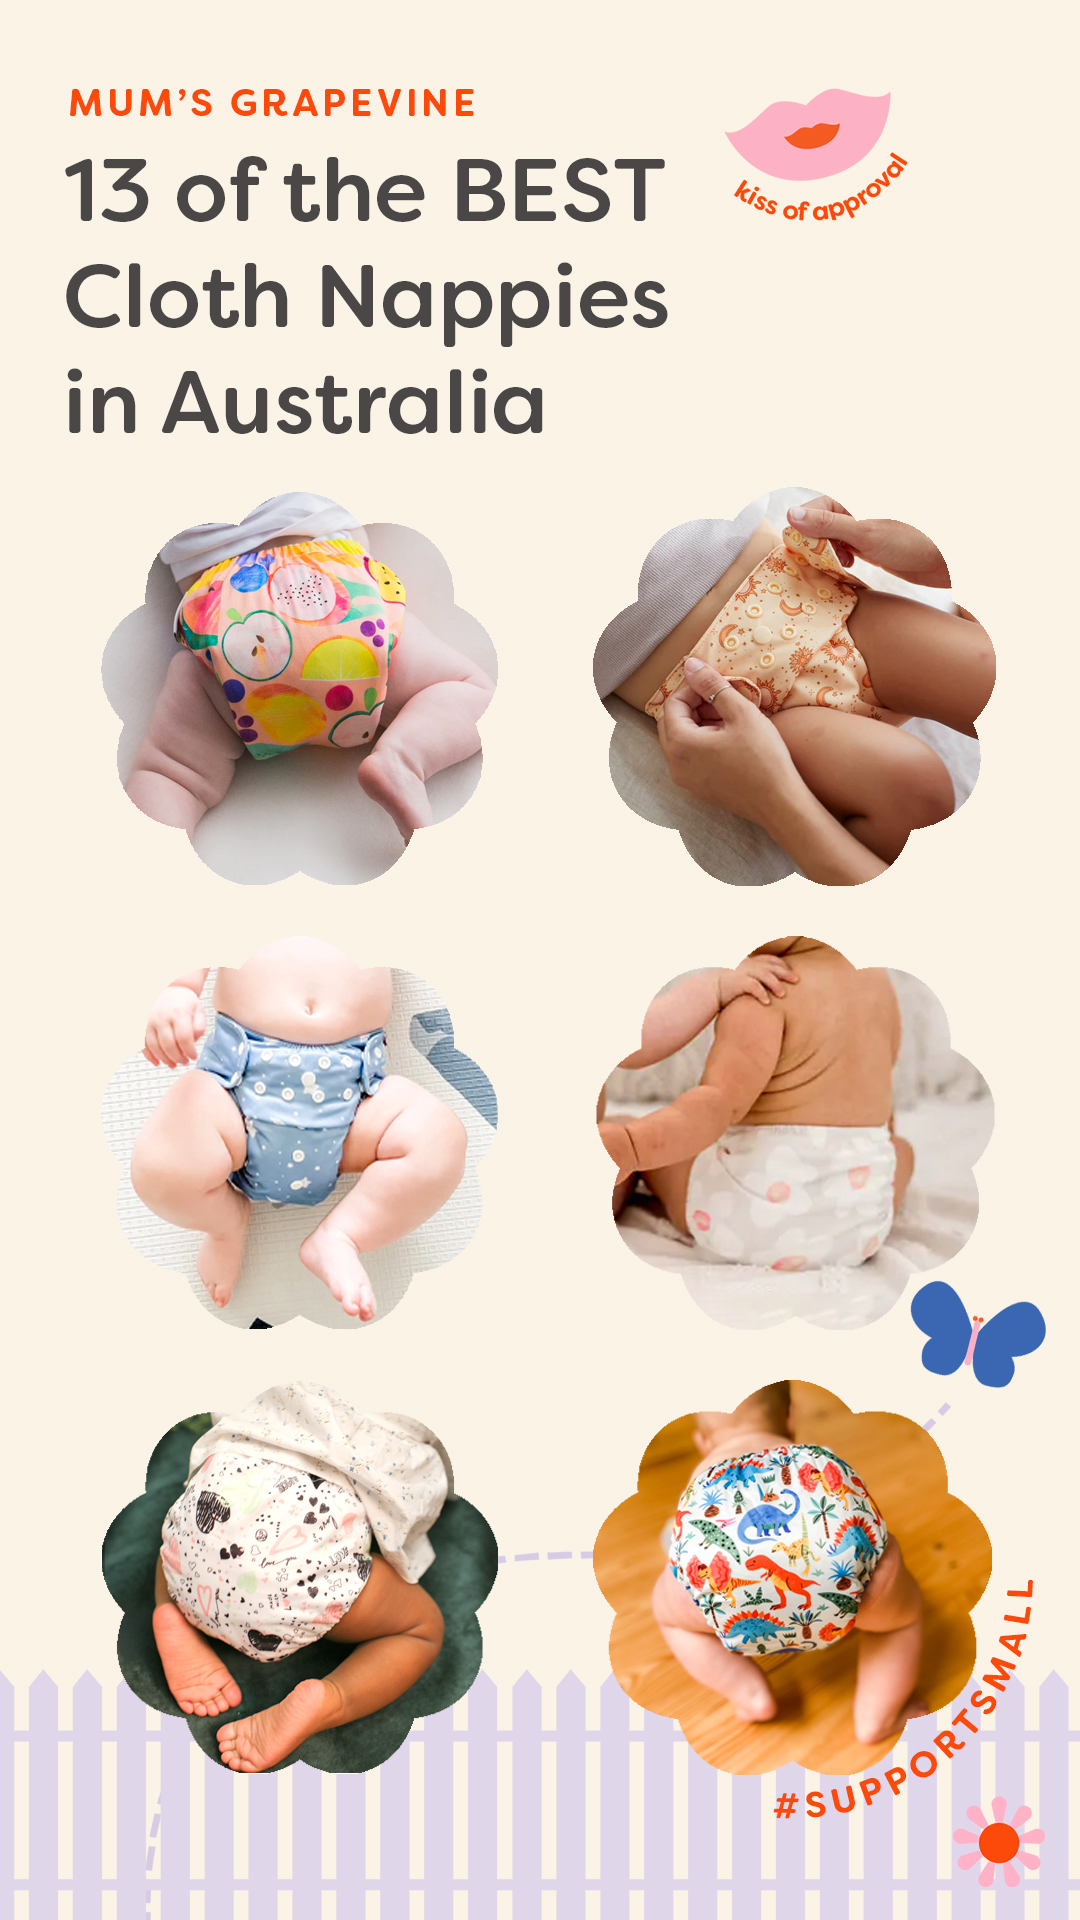 13 of the Best Cloth Nappies in Australia